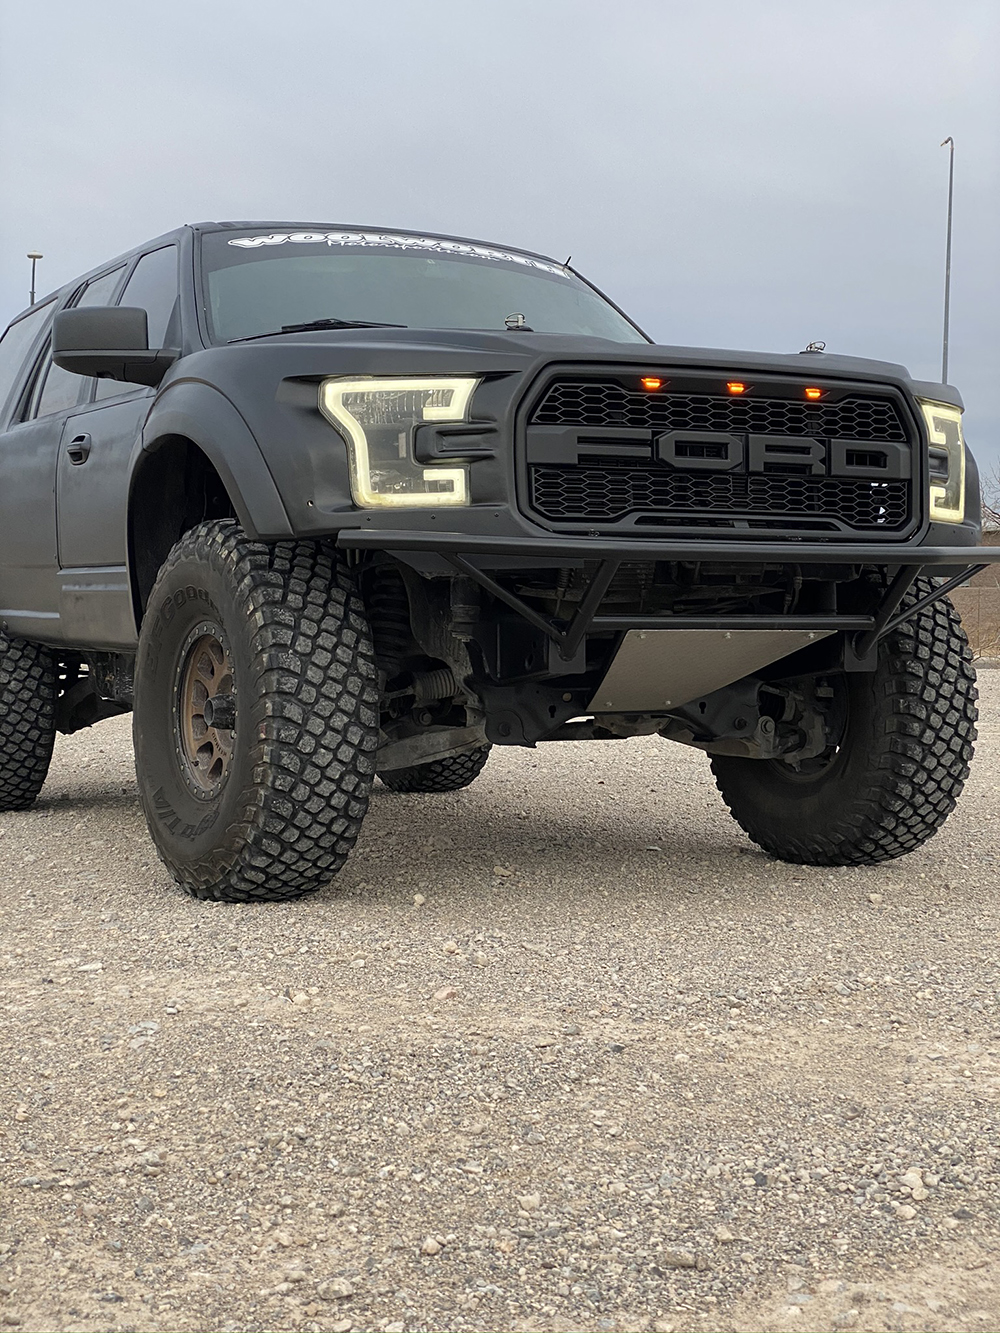 Lifted Lifted Ford Expedition with ford f150 Raptor front end swap